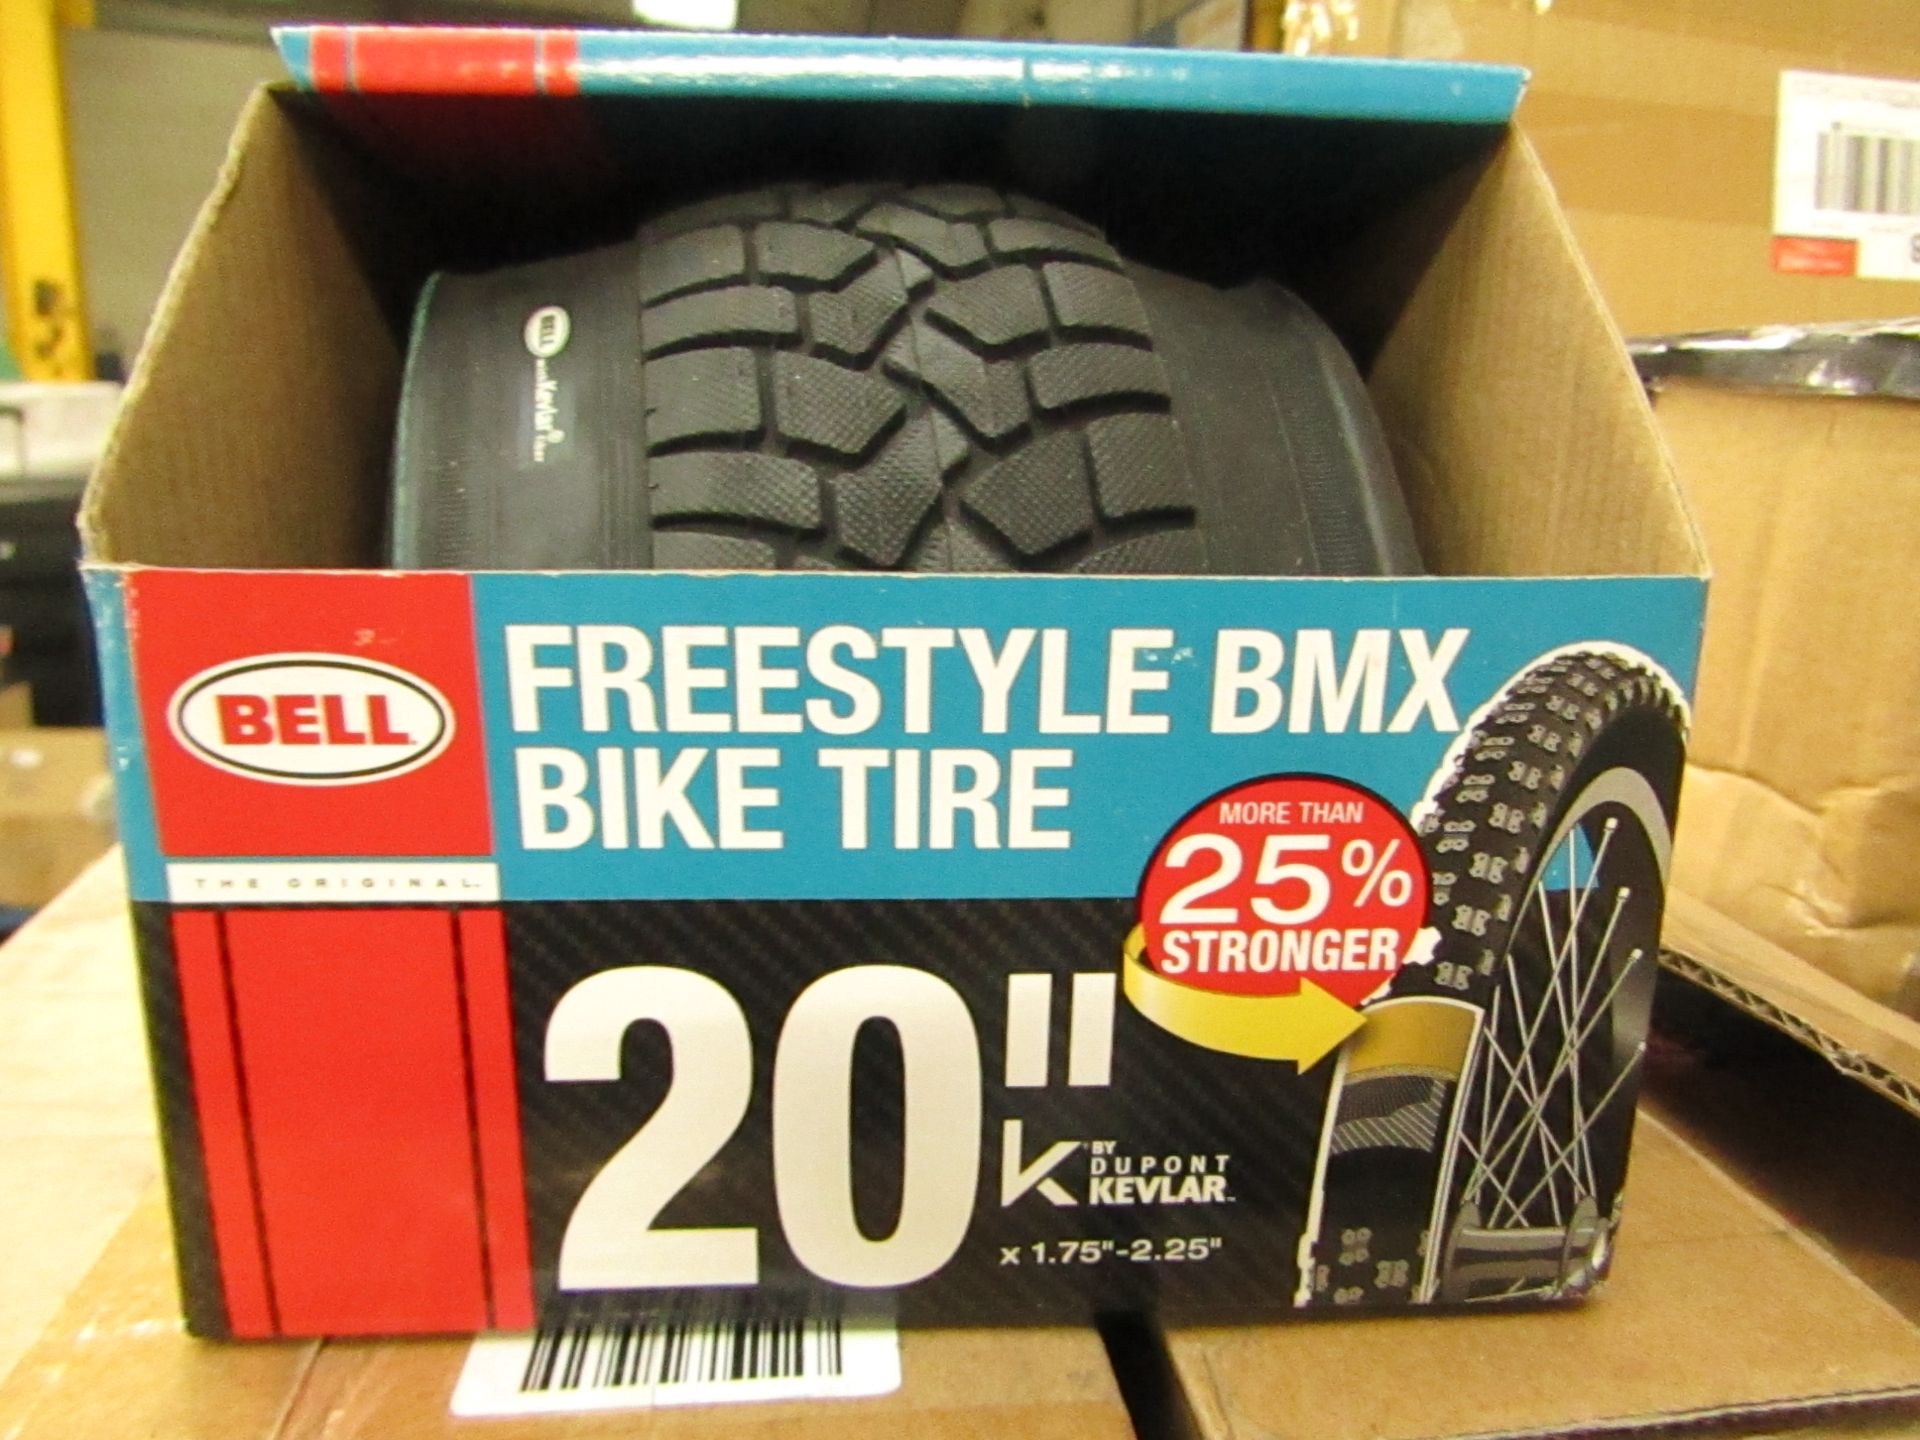 Bell Freestyle BMX Bike Tyre.20". New & Boxed